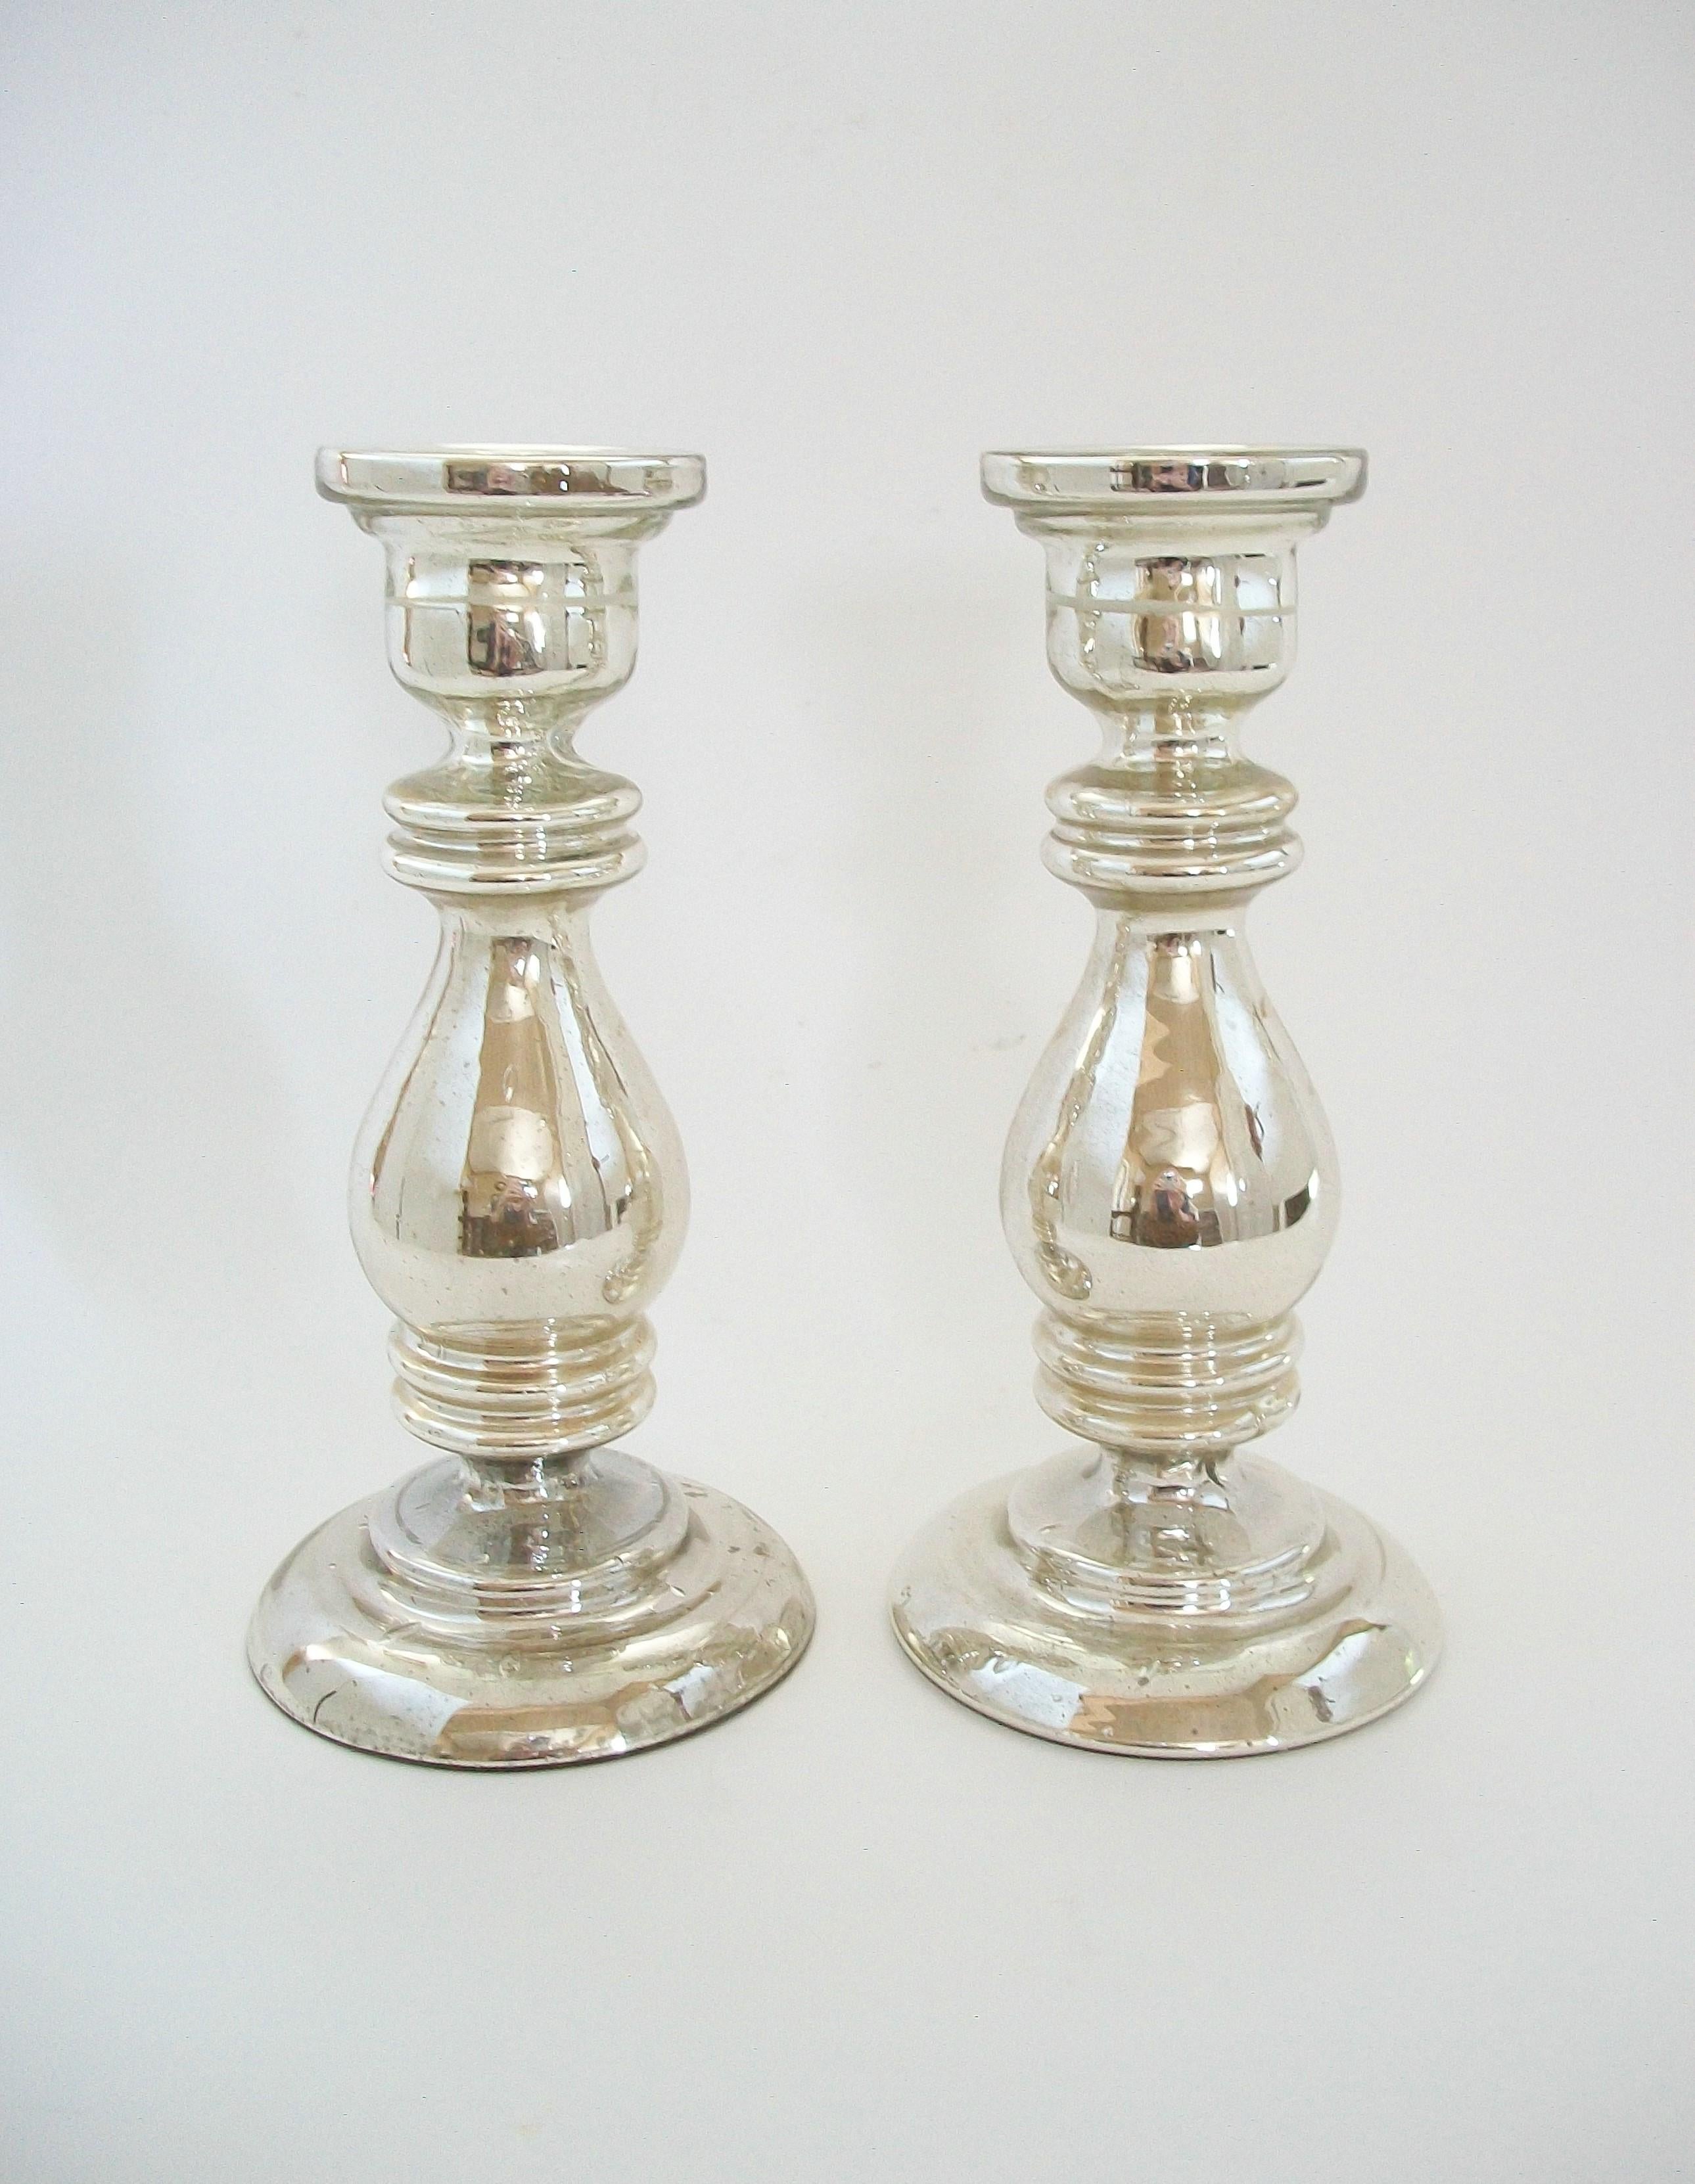 French Antique Pair of Painted Mercury Glass Candlesticks - France - Late 19th Century